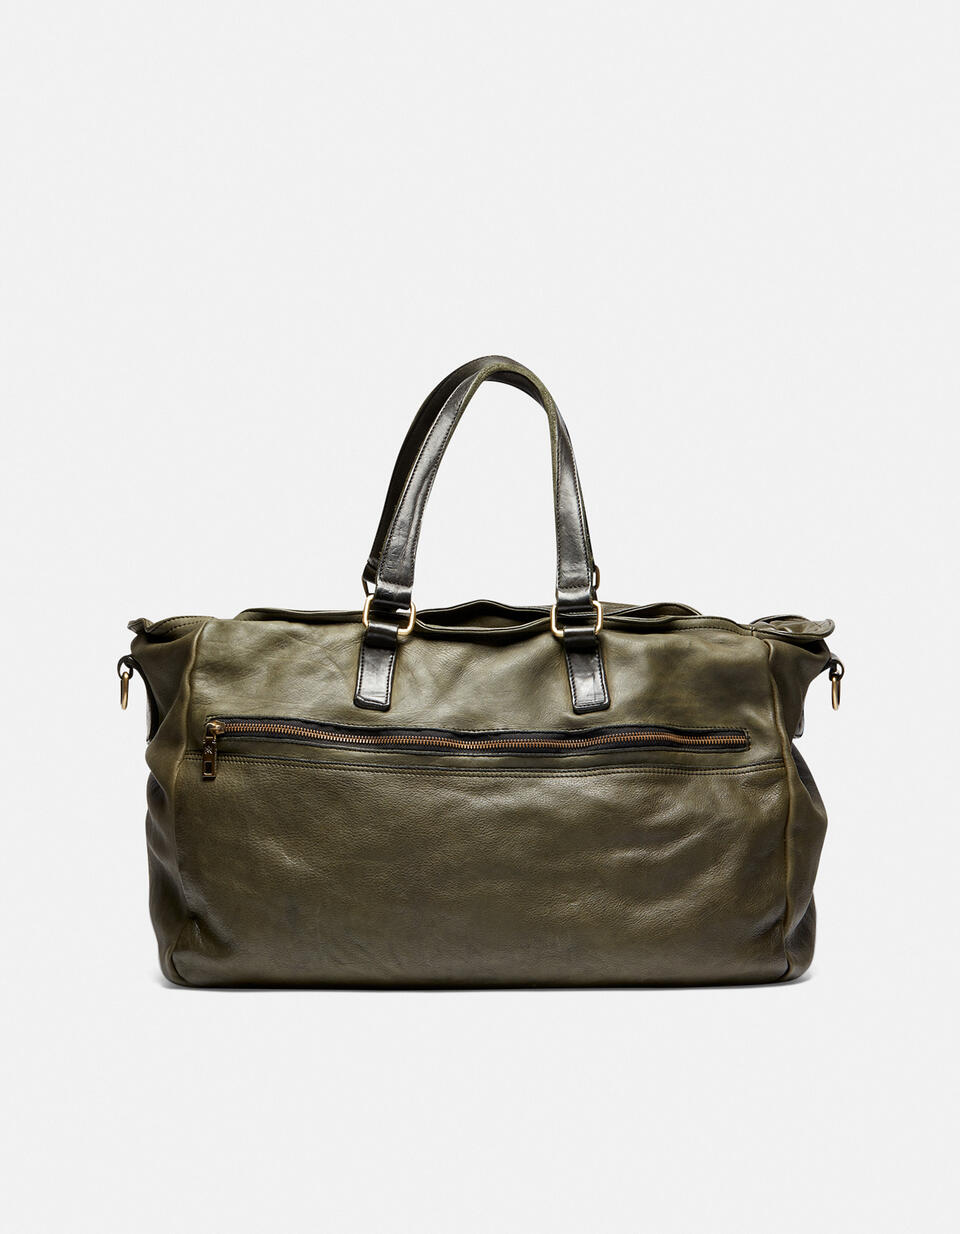 Millennial weekender bag - Luggage | TRAVEL BAGS FORESTA - Luggage | TRAVEL BAGSCuoieria Fiorentina